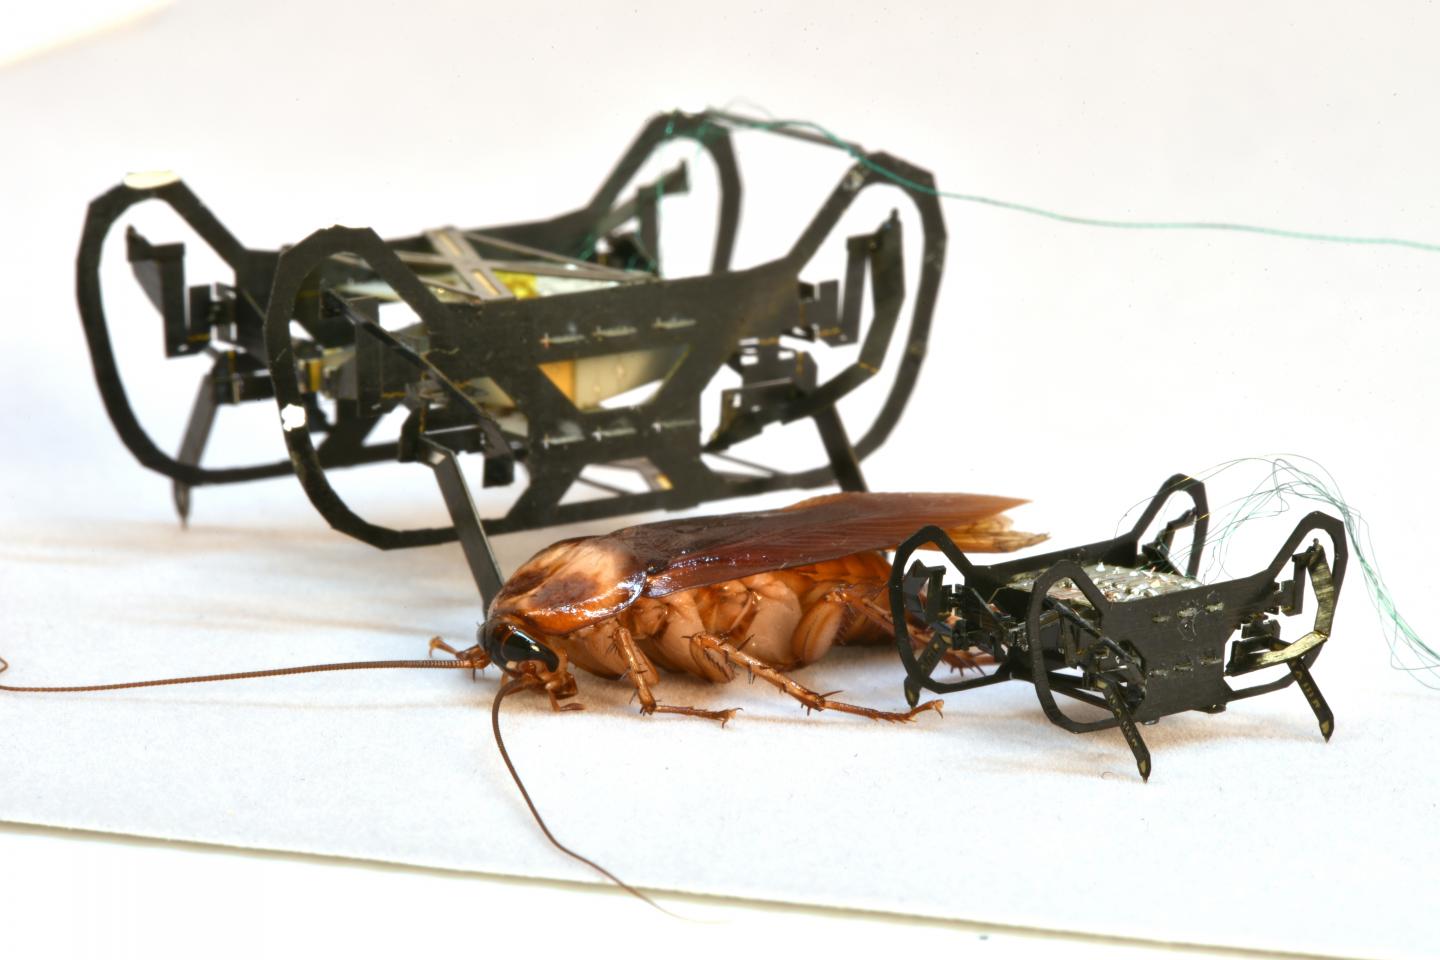 HAMR and HAMR JR with a Cockroach